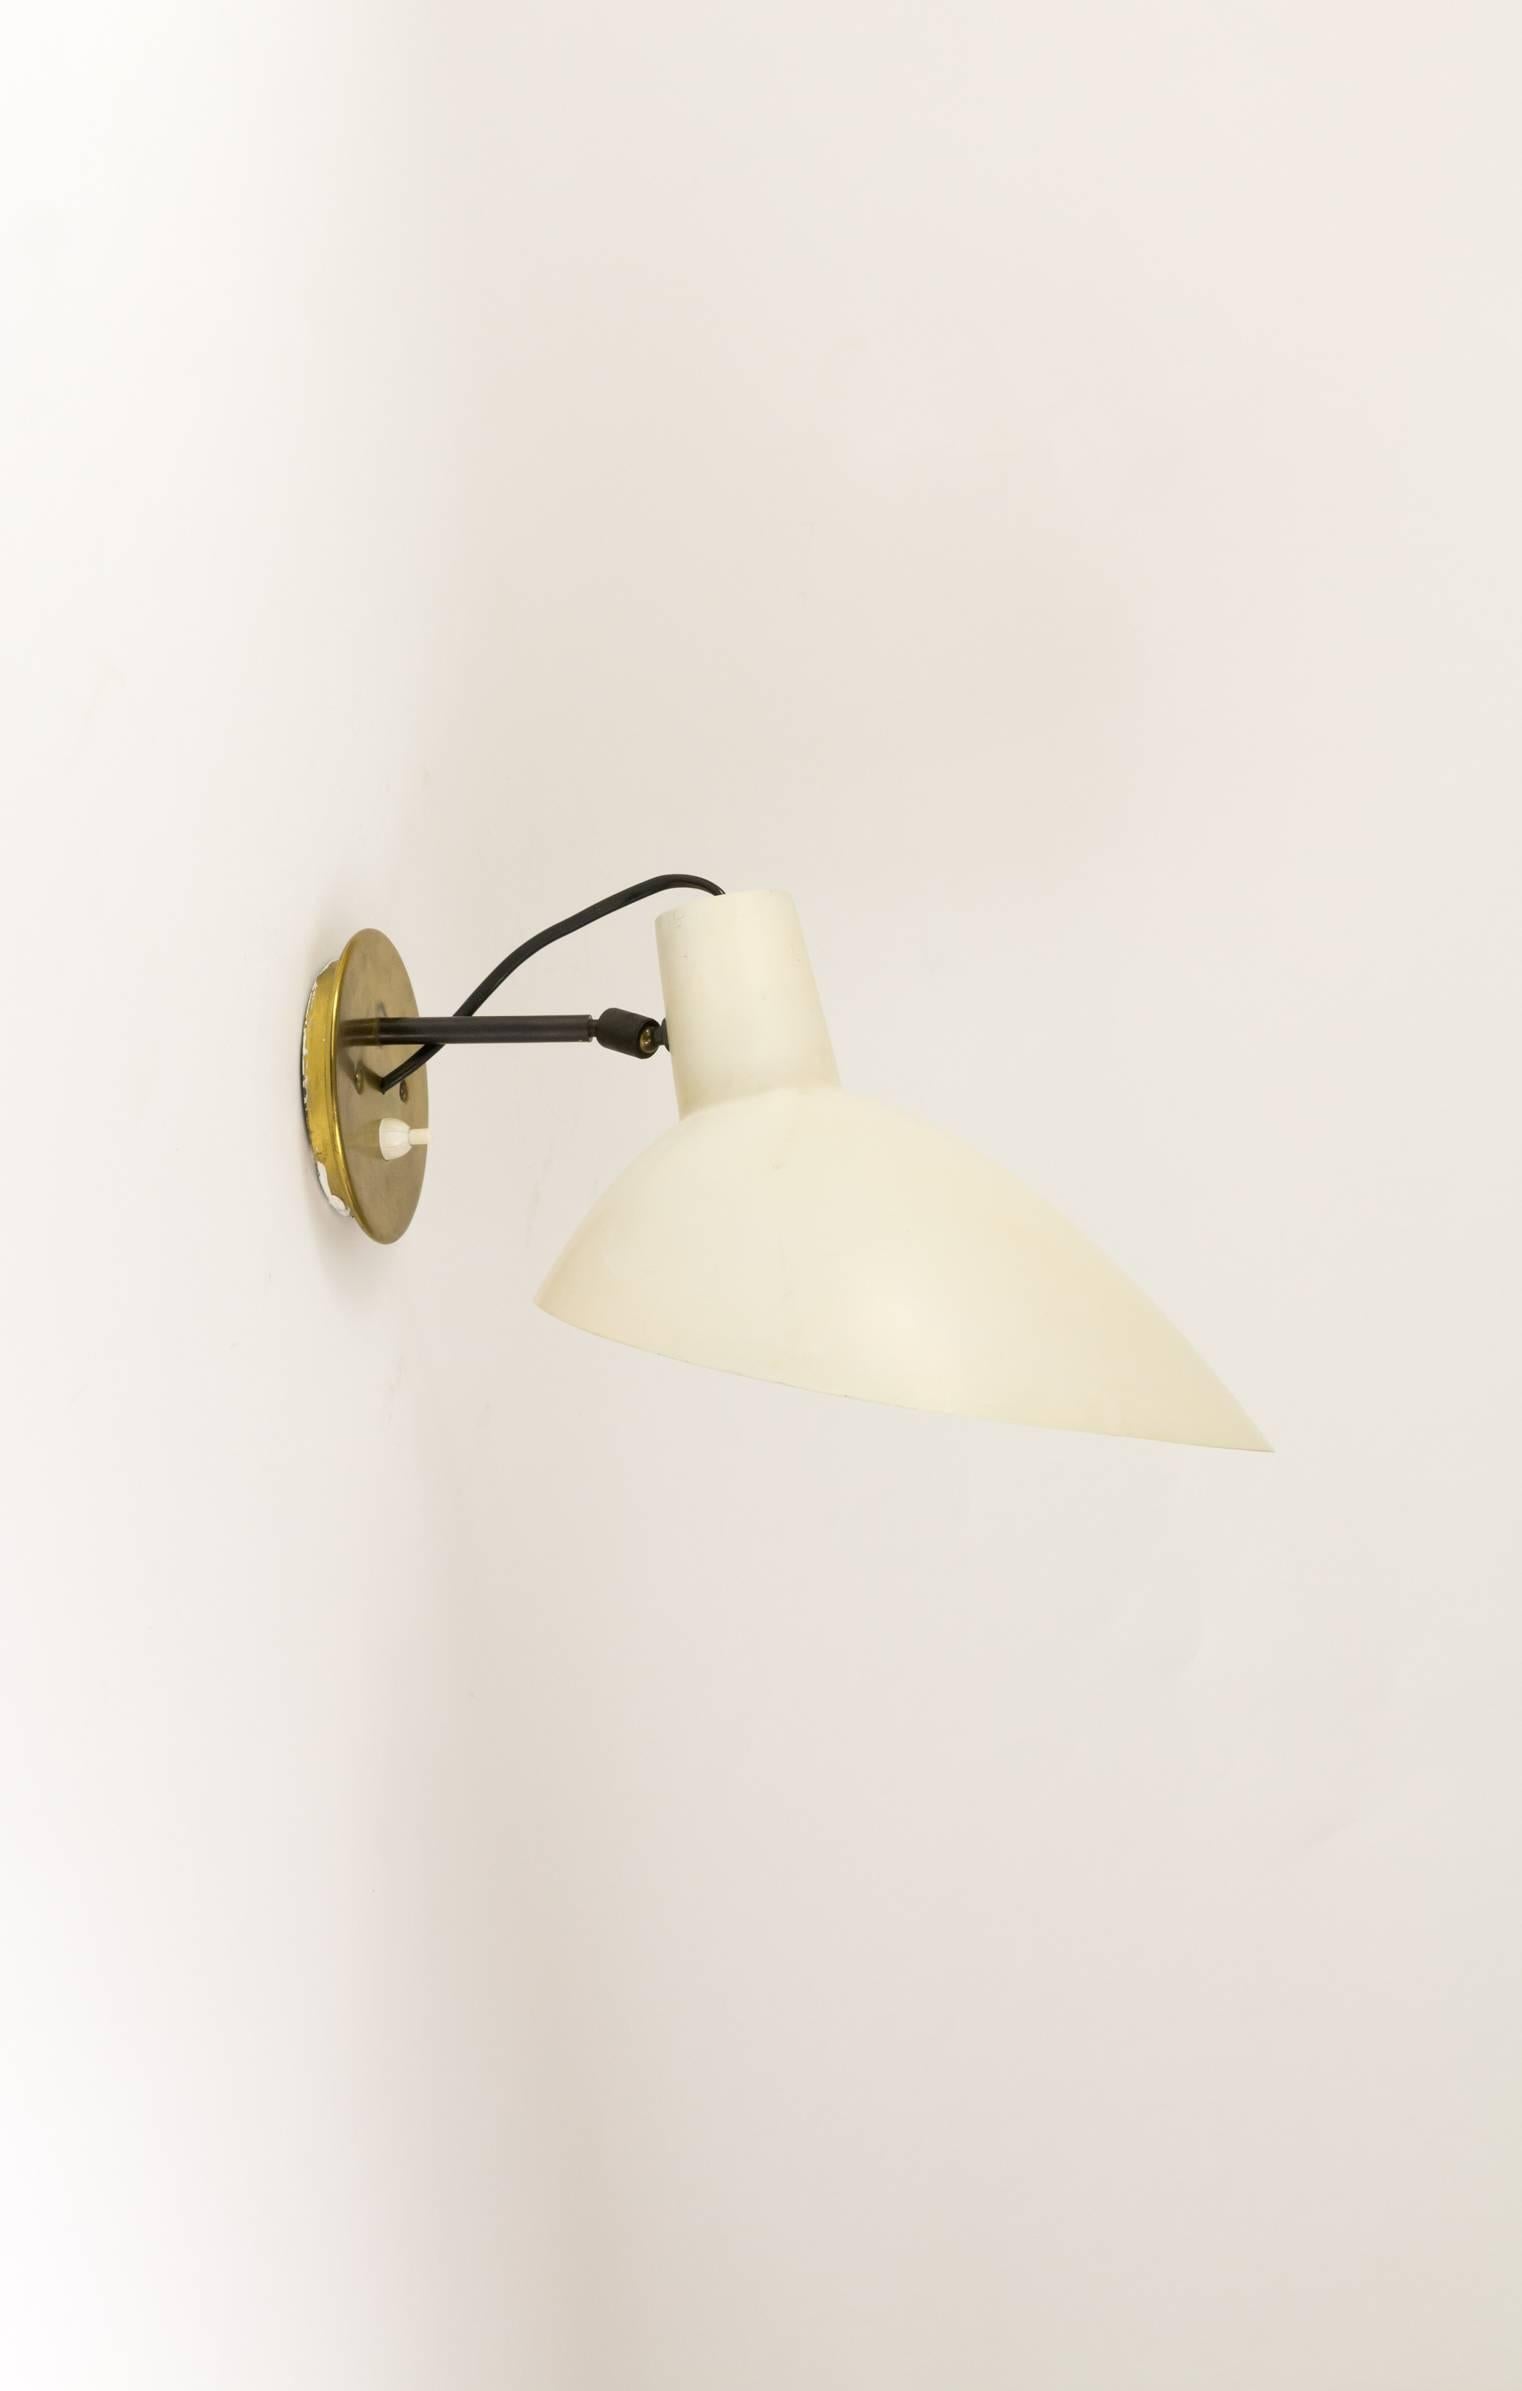 Mid-Century Modern Adjustable Wall Lamp by Vittoriano Viganò for Arteluce, 1950s